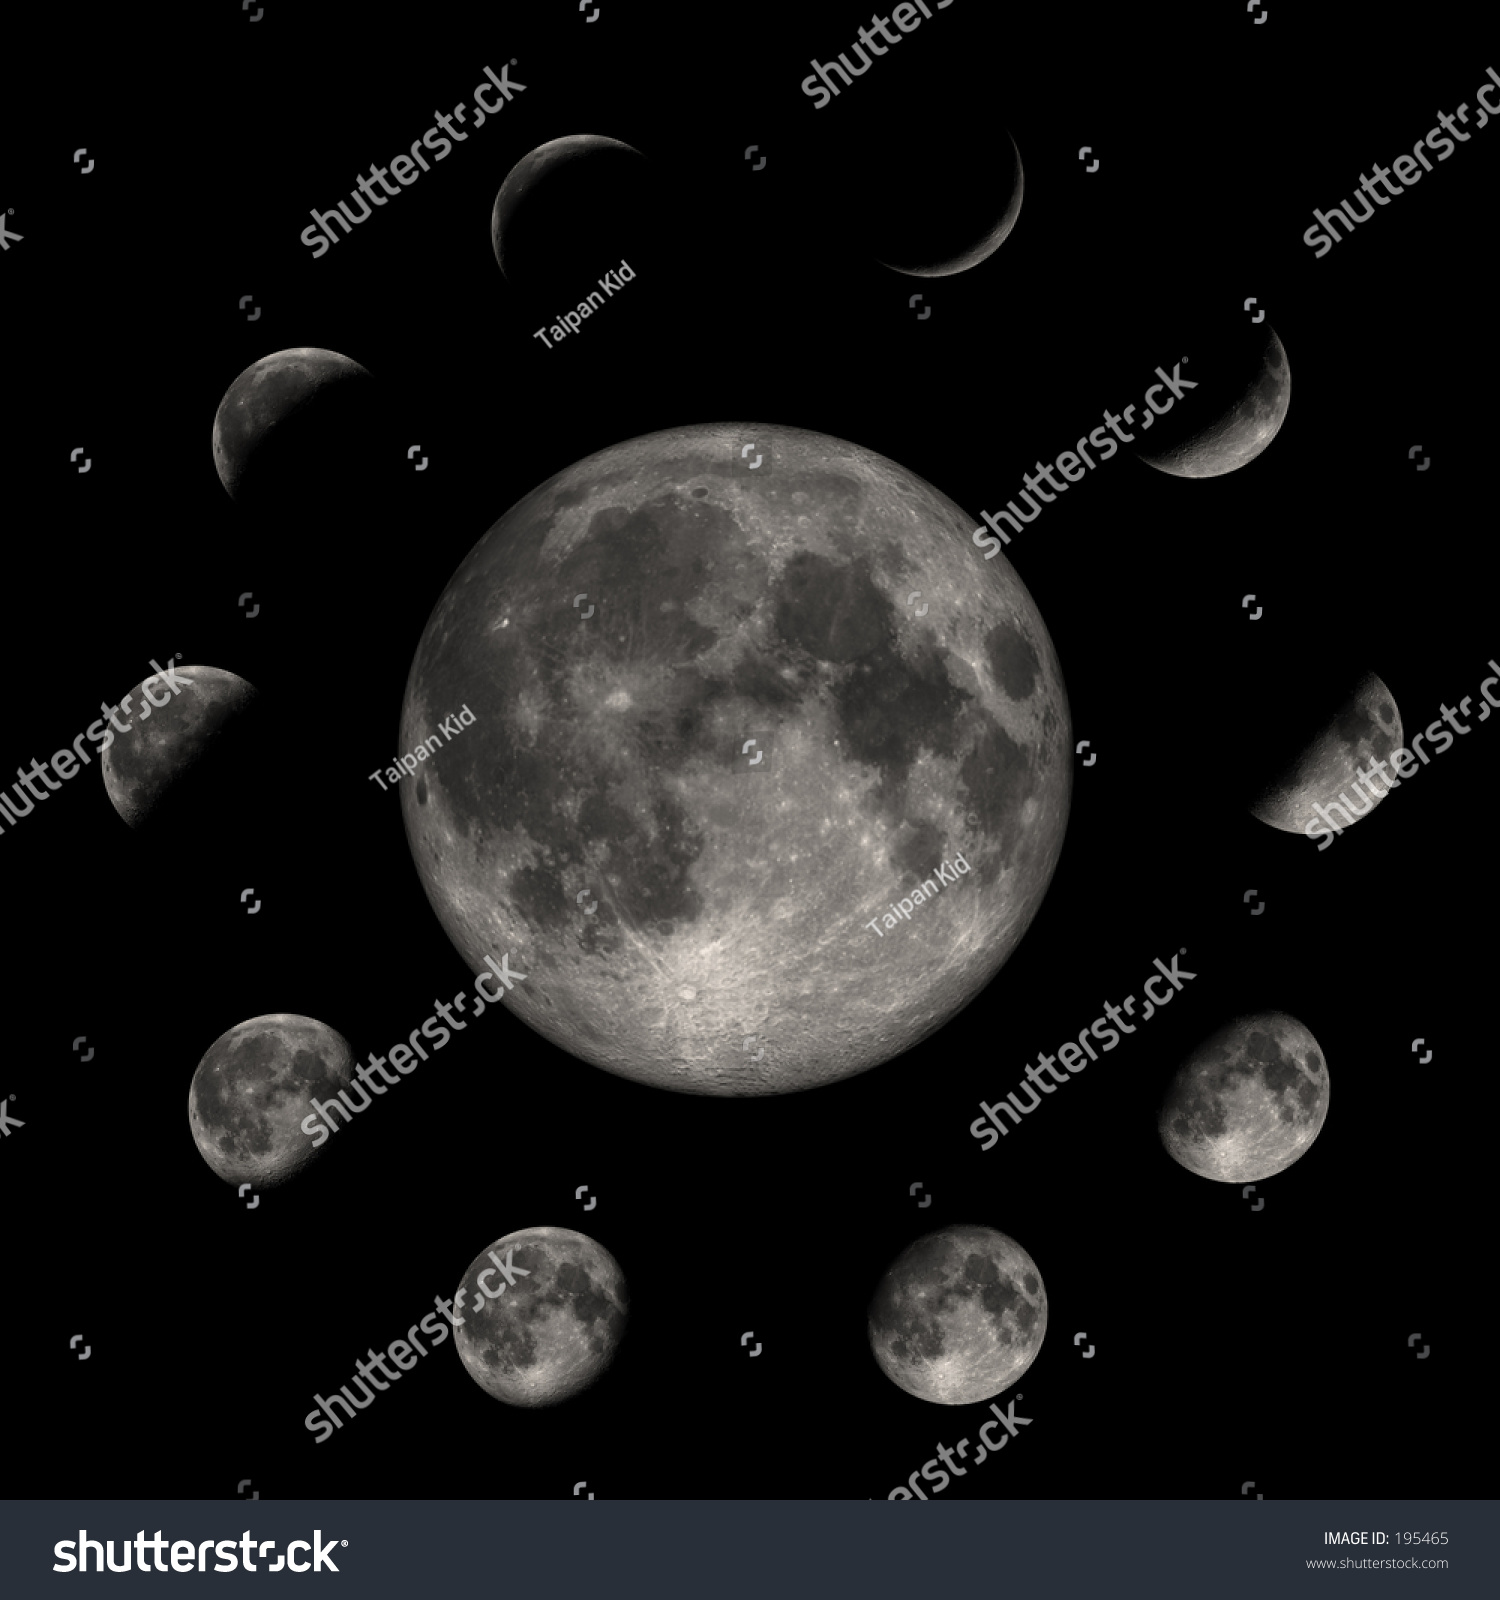 Computer Generated Moon Phase Stock Photo 195465 : Shutterstock